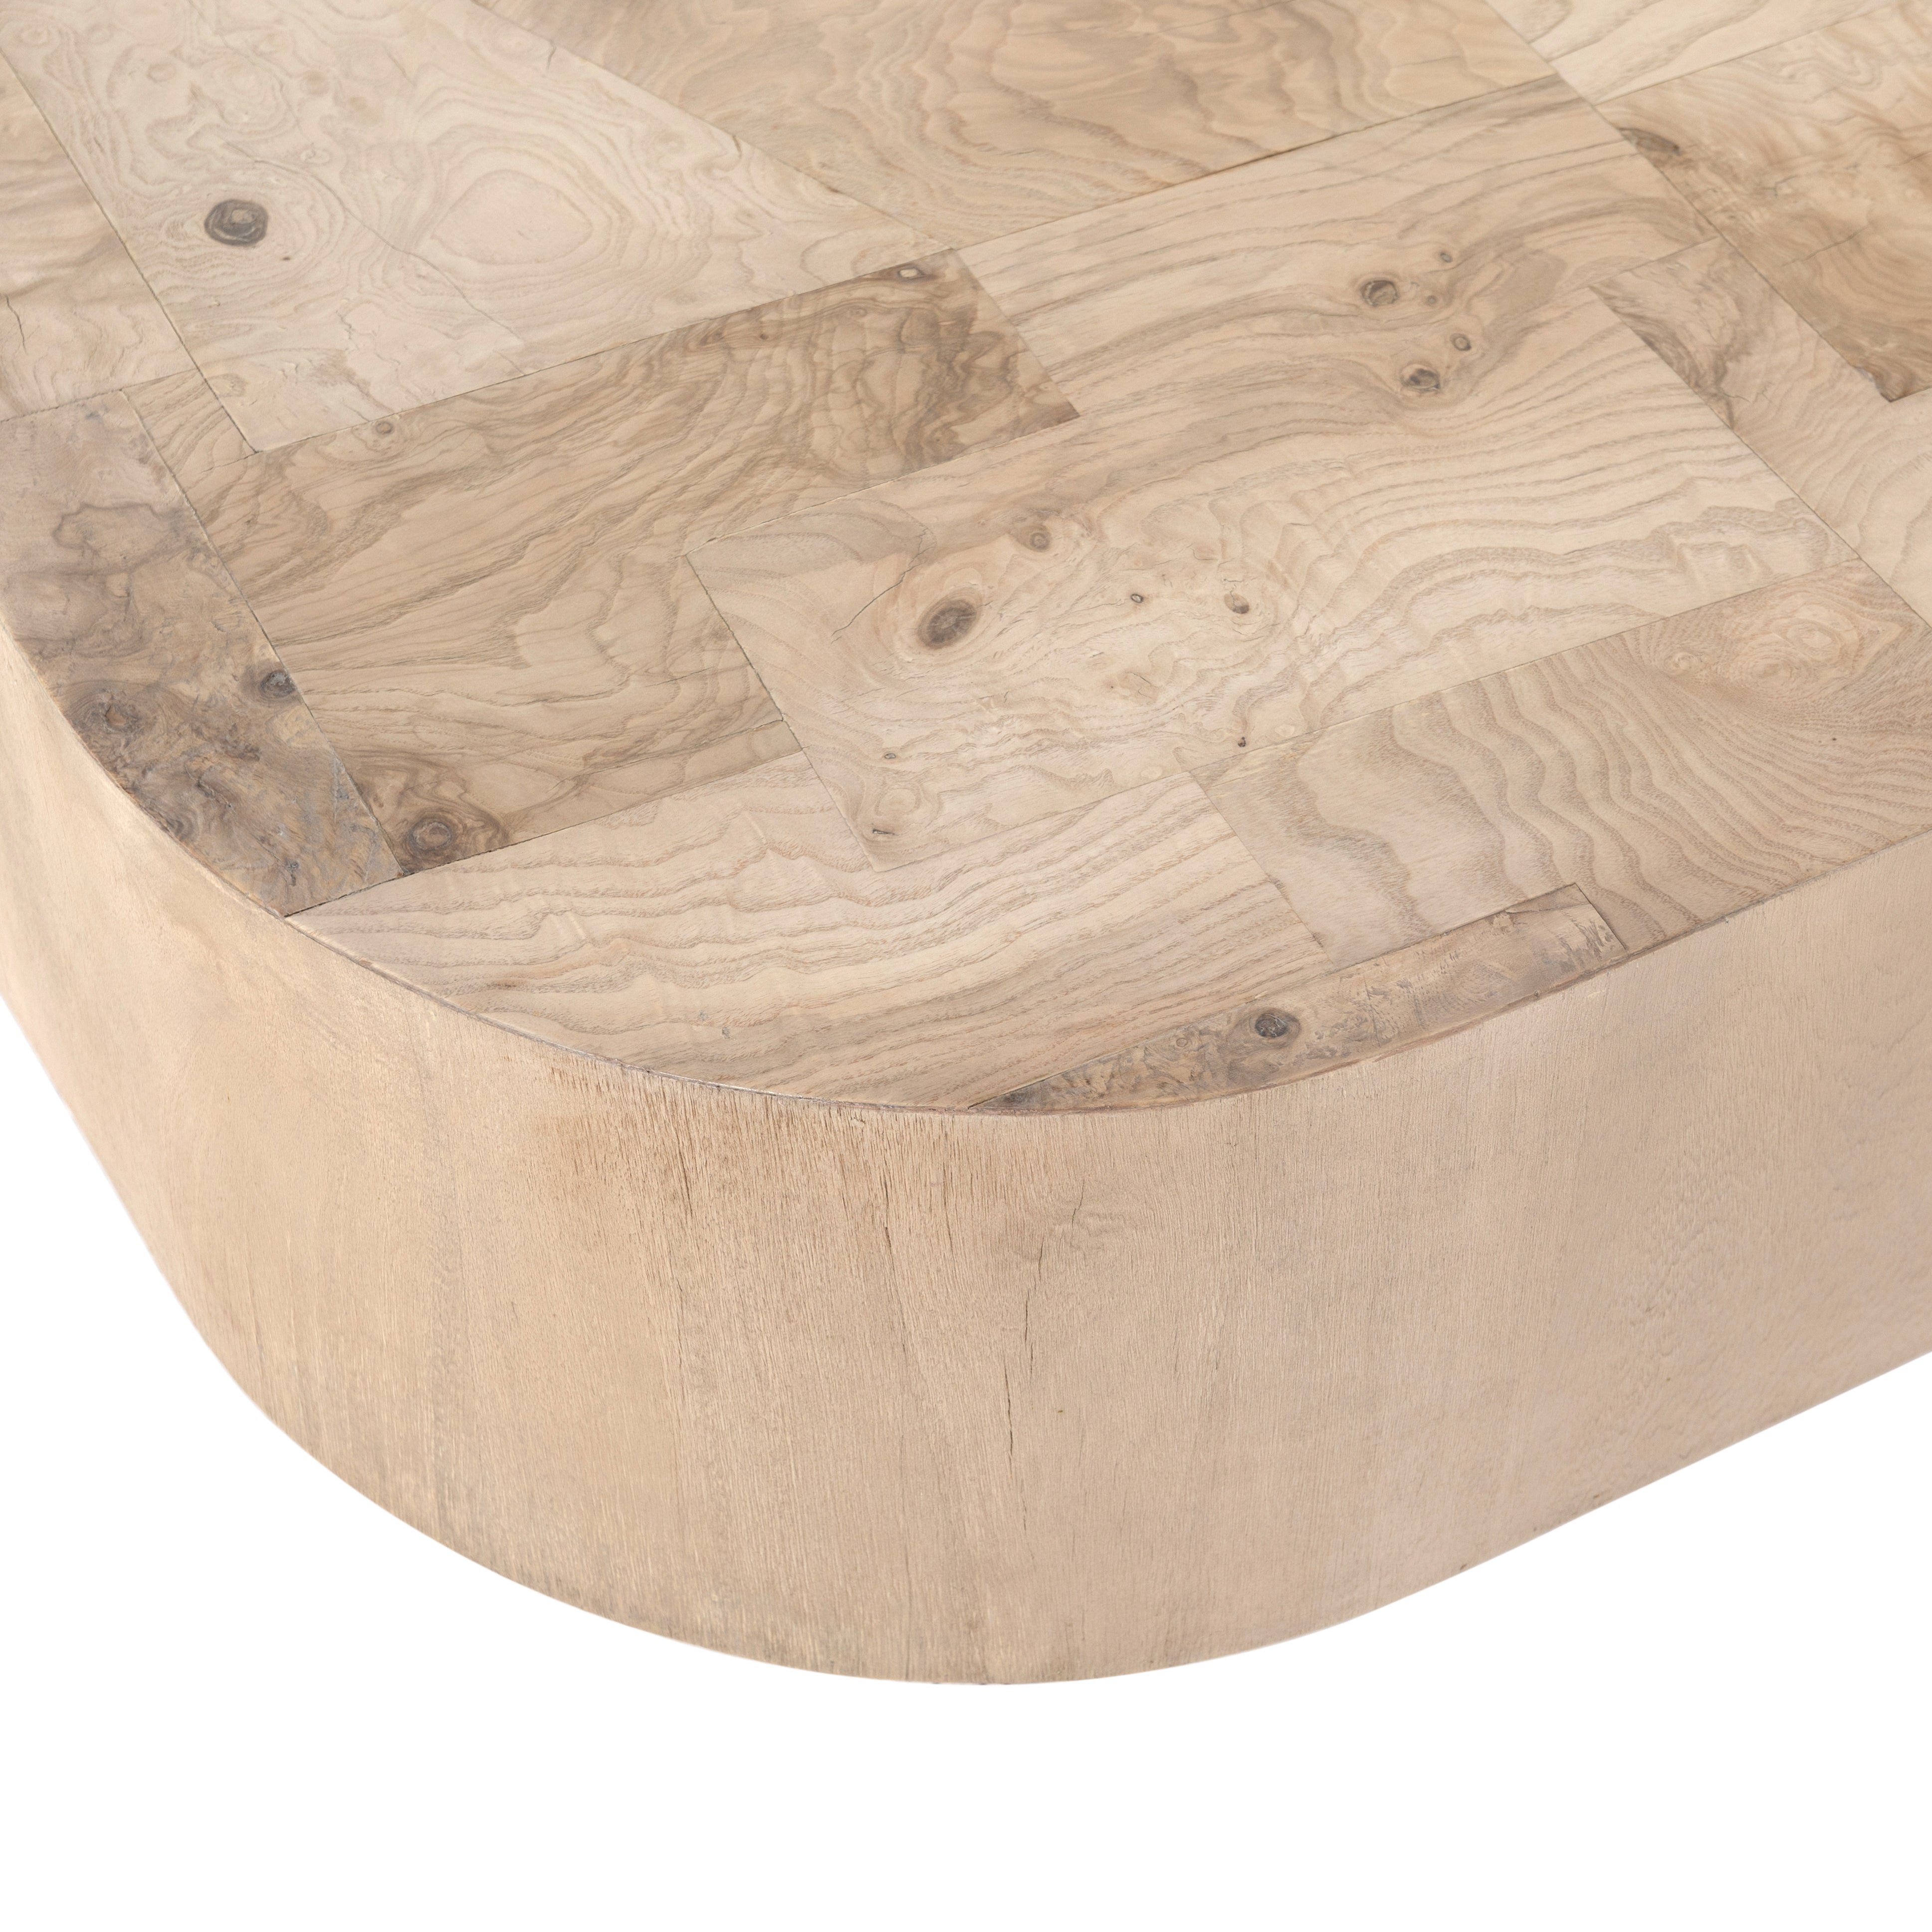 Made from bleached ash burl, this Blanco Coffee Table - Bleached Burl is a soft-squared tabletop featuring a patchwork pattern to bring novel movement to the modern coffee table. Finished in an ashen walnut, mahogany veneer sides and an inset base complete a beautifully light look for any living room or lounge area.   Overall Dimensions: 40.00"w x 40.00"d x 16.00"h